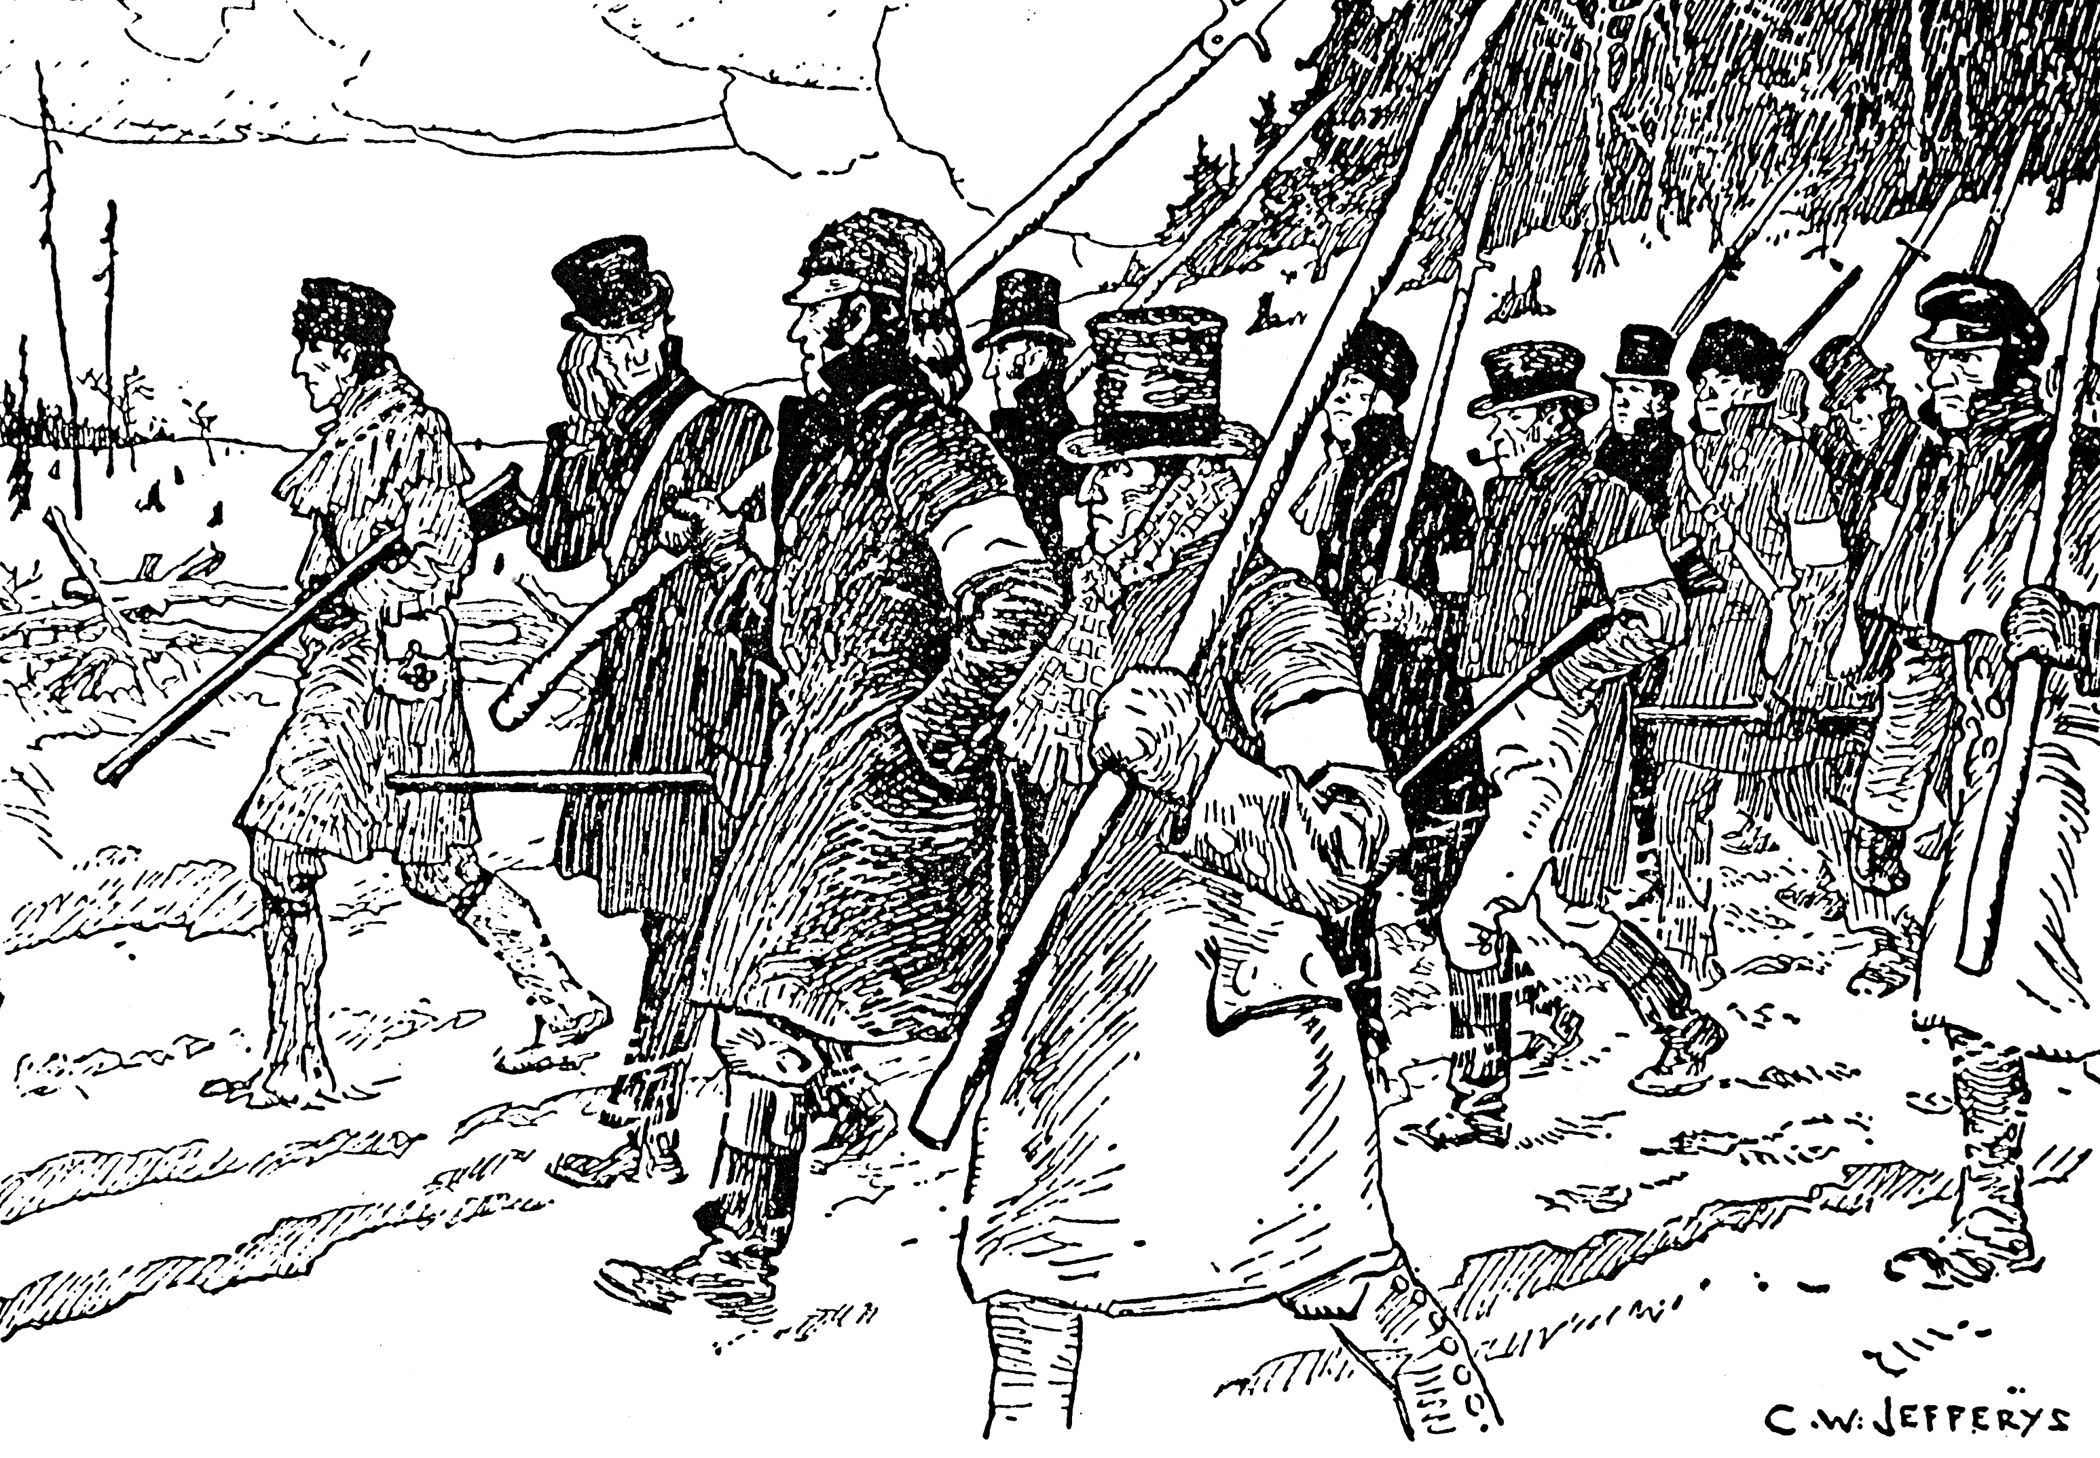 Some of the 800 armed Canadian insurgents march down Yonge Street to attack Toronto in December 1837.